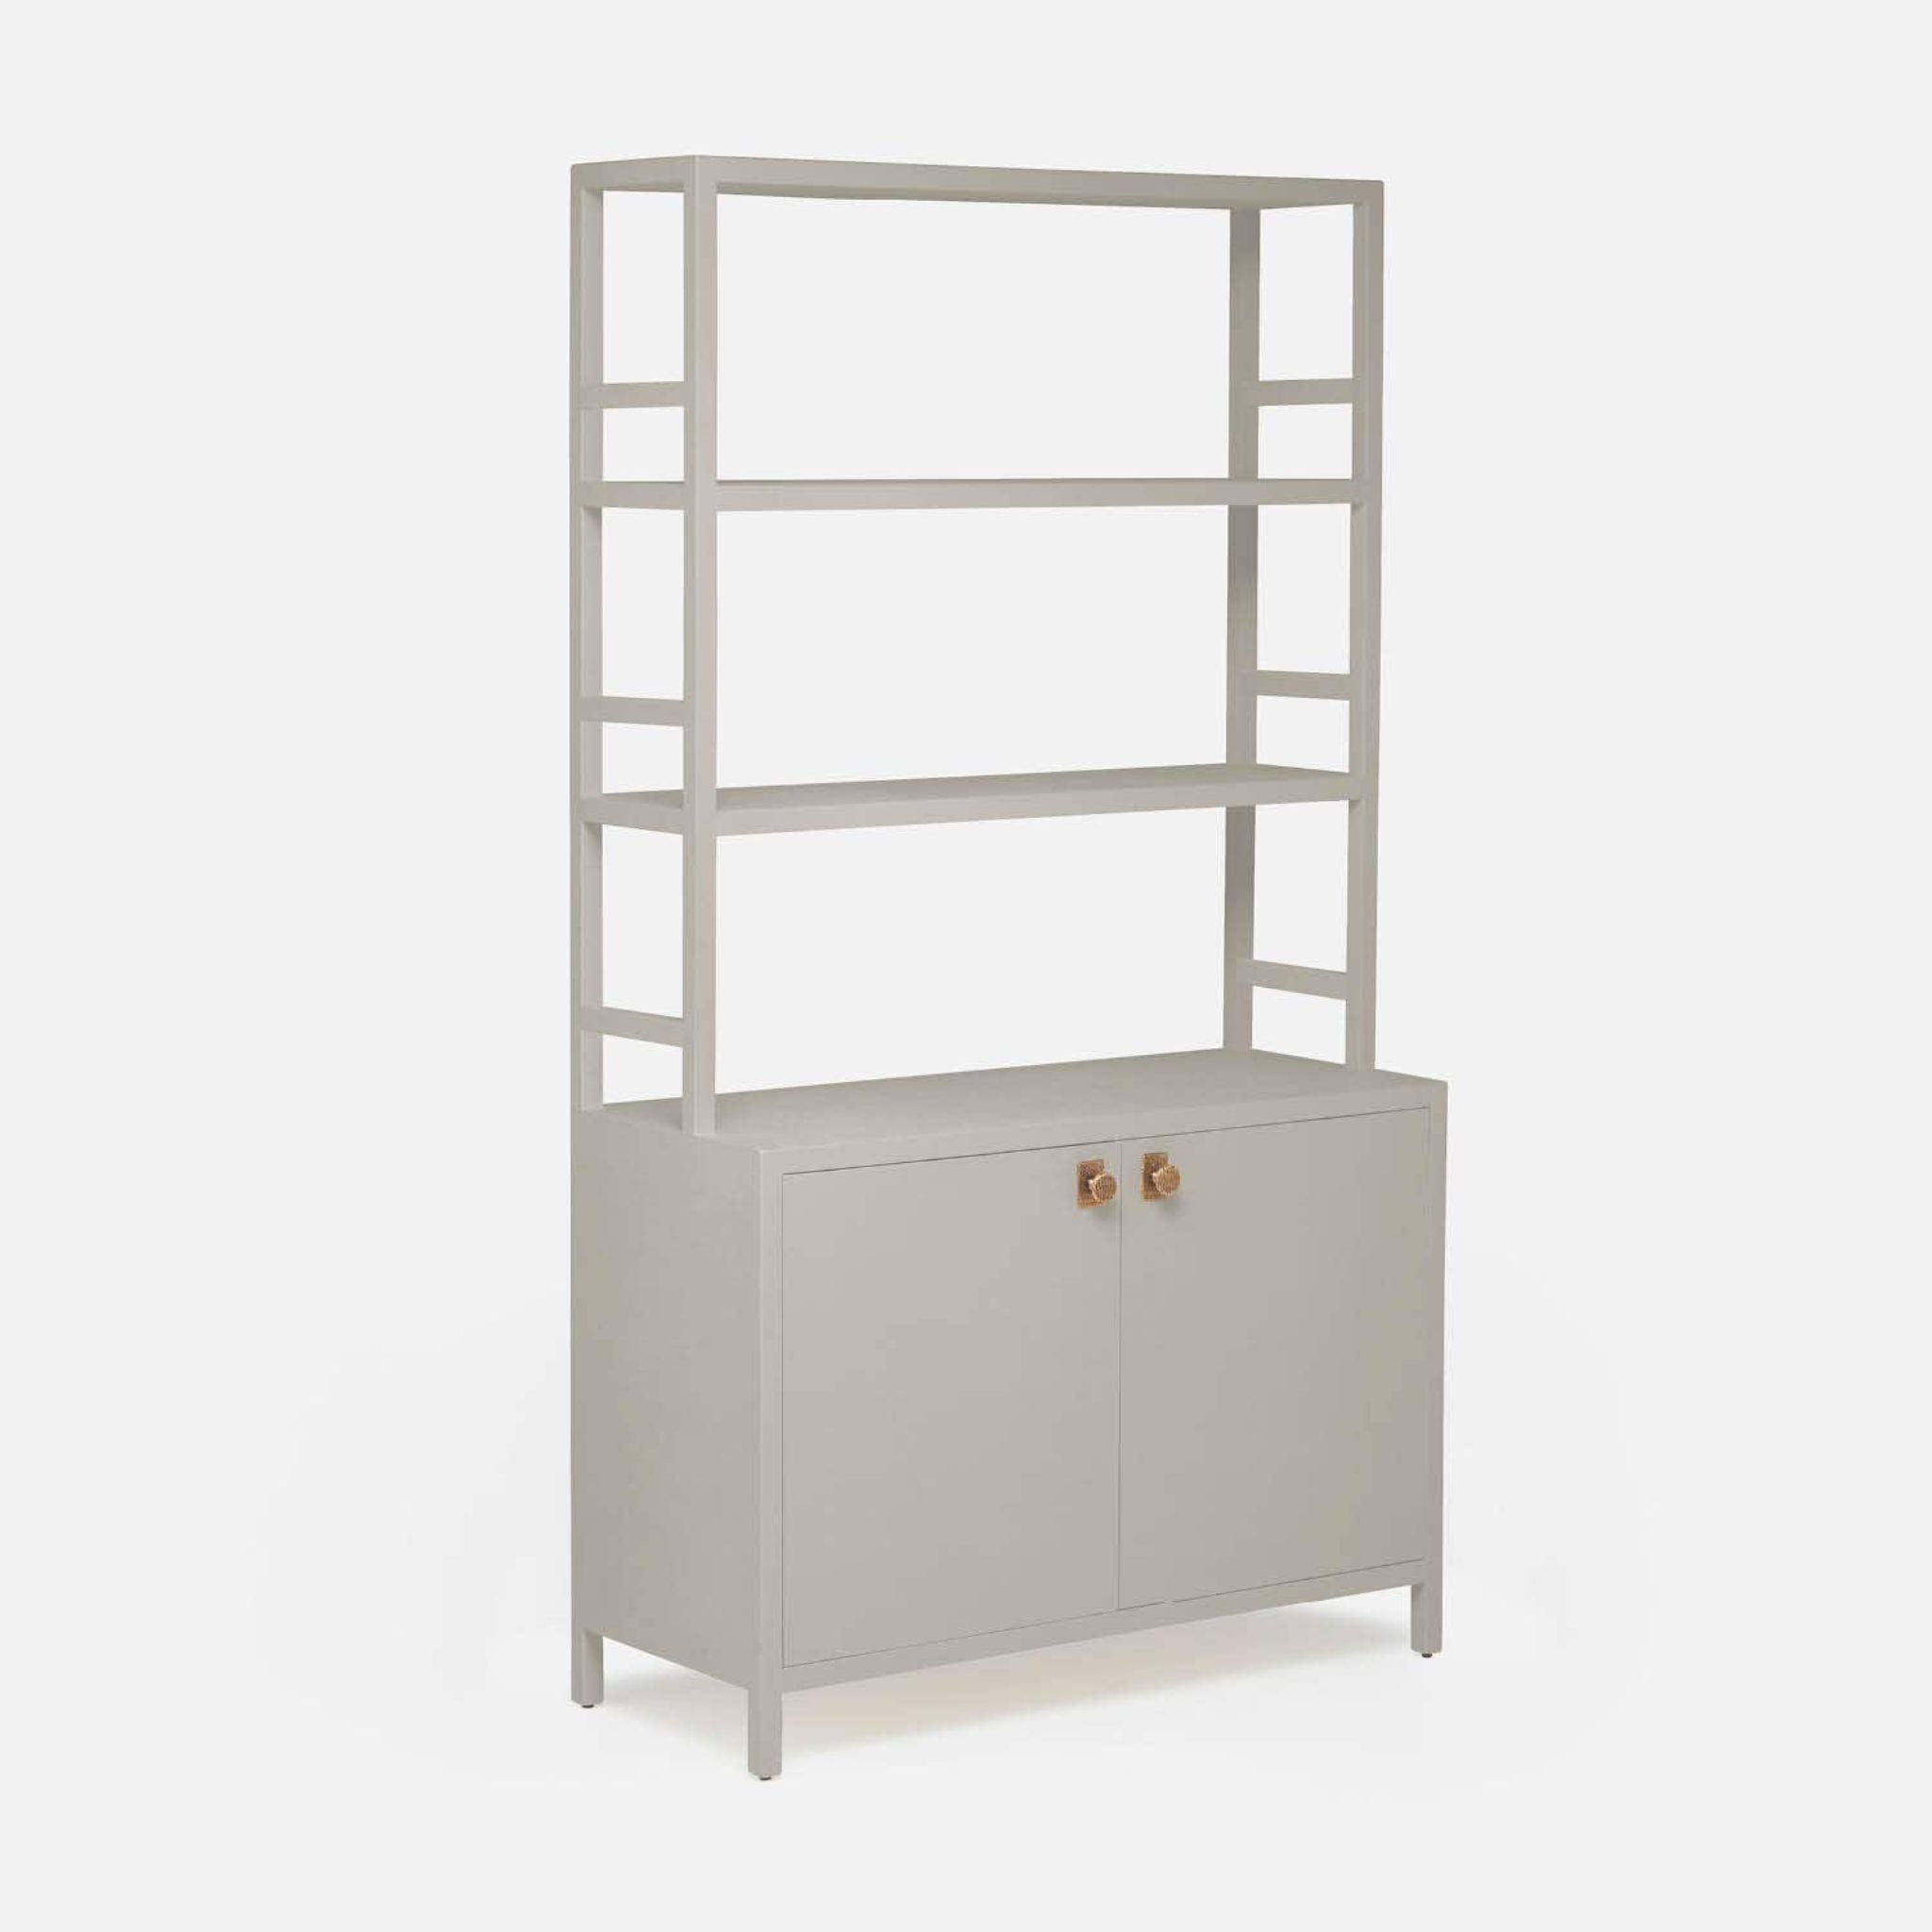 JAKE BOOKCASE WITH HUTCH - LIGHT GRAY